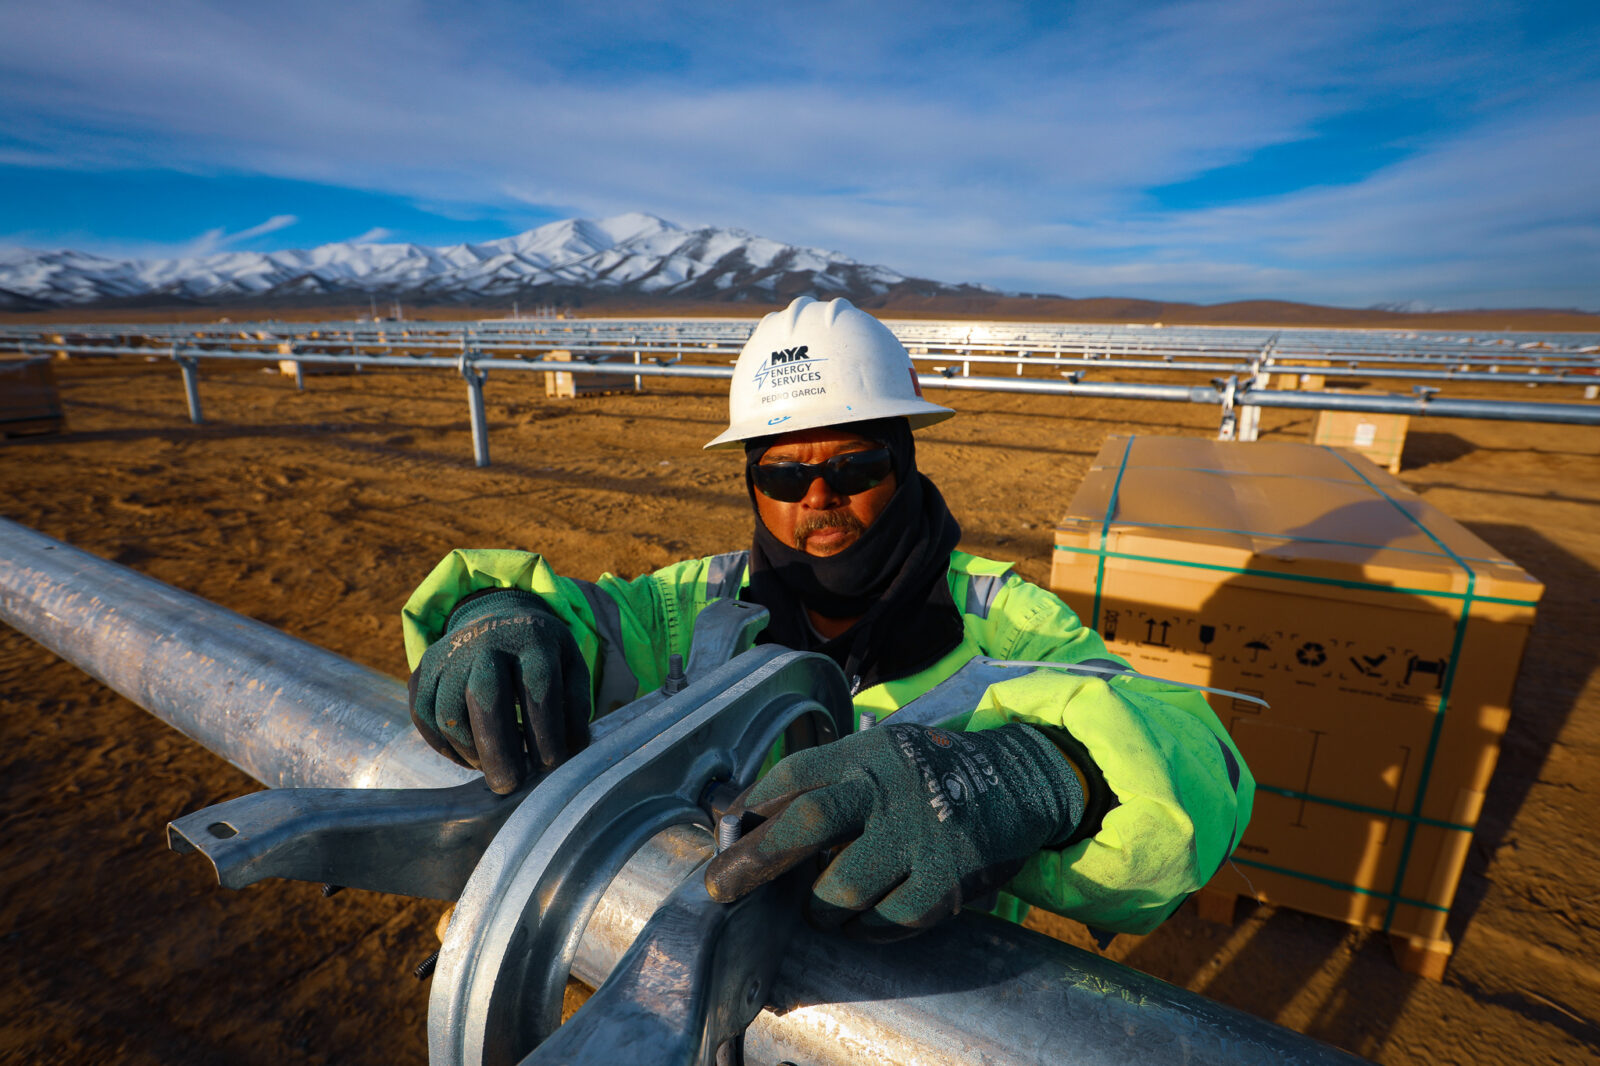 MYRE Energy employee prepares for solar panel installation with snowcapped mountains in the distance